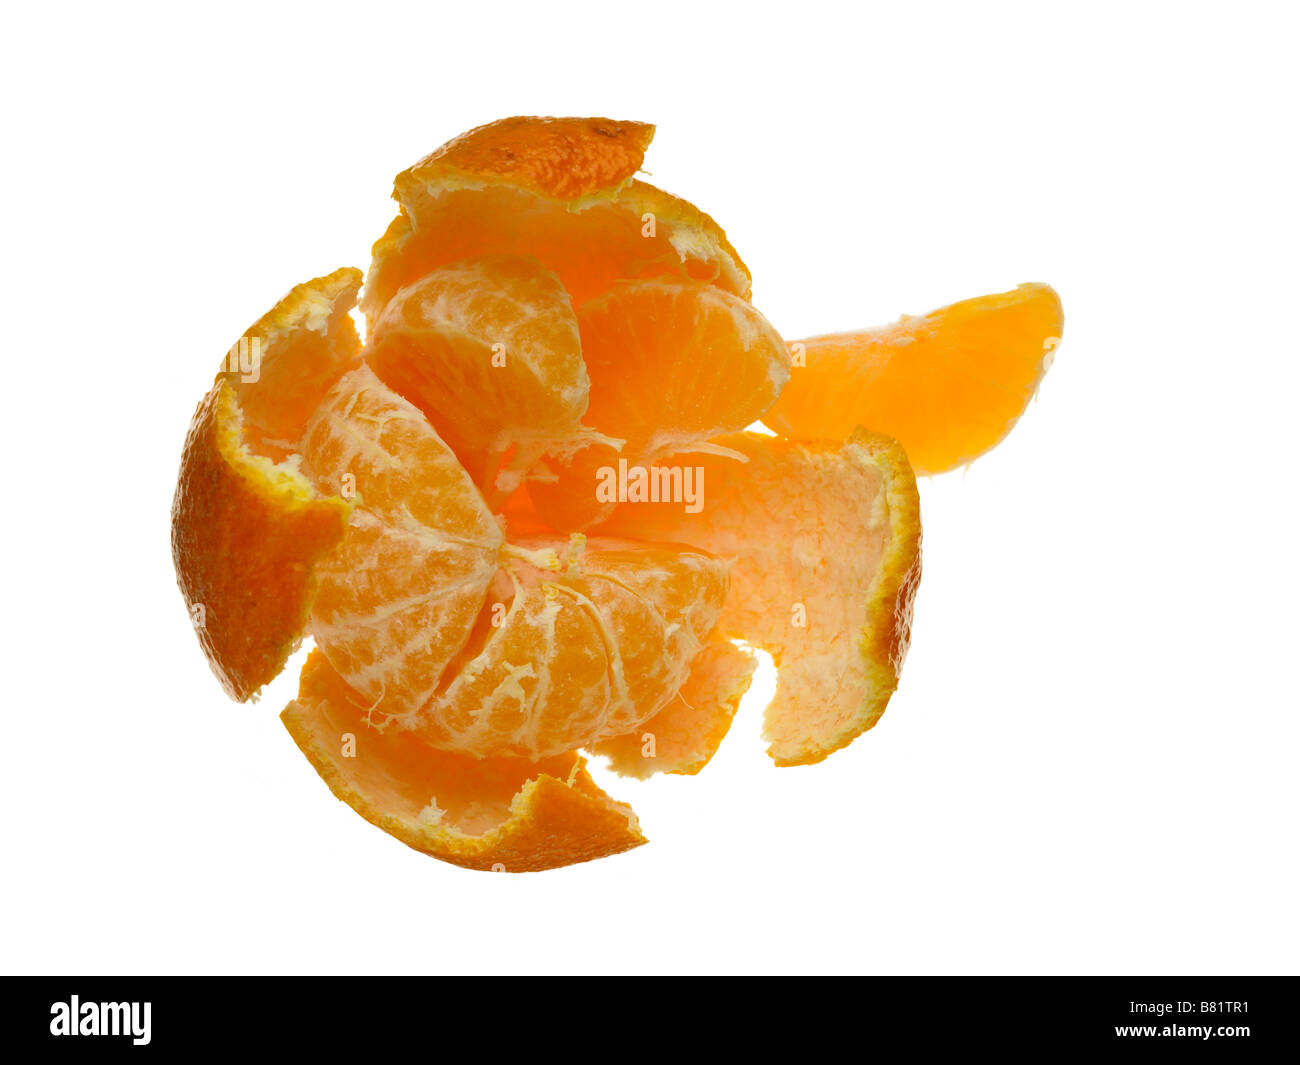 clementine, part peeled Stock Photo